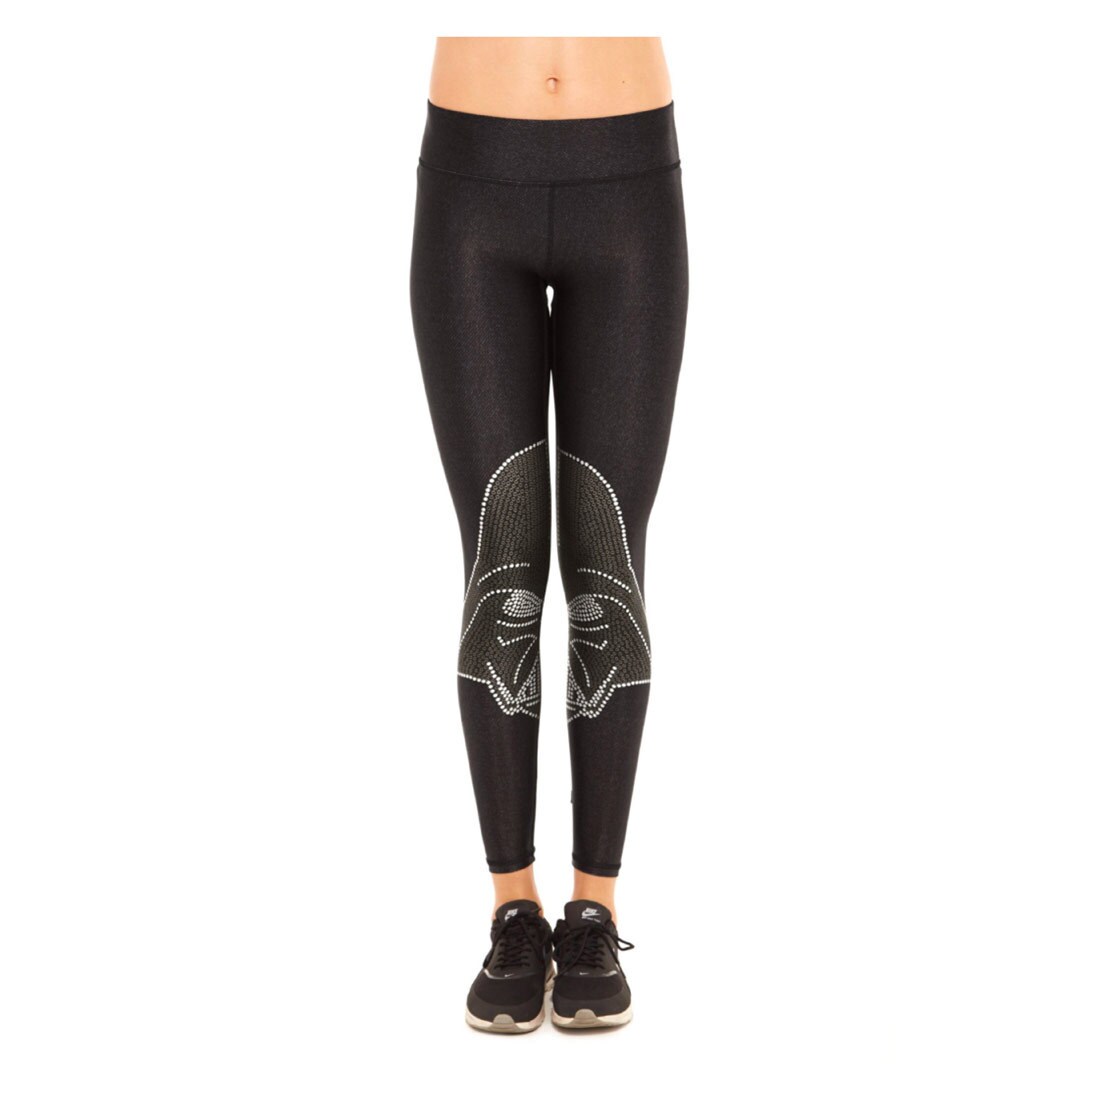 Black Star Wars leggings, by activewear company Terez, show half of Darth Vader's face on each leg, forming his full face when the legs are together.